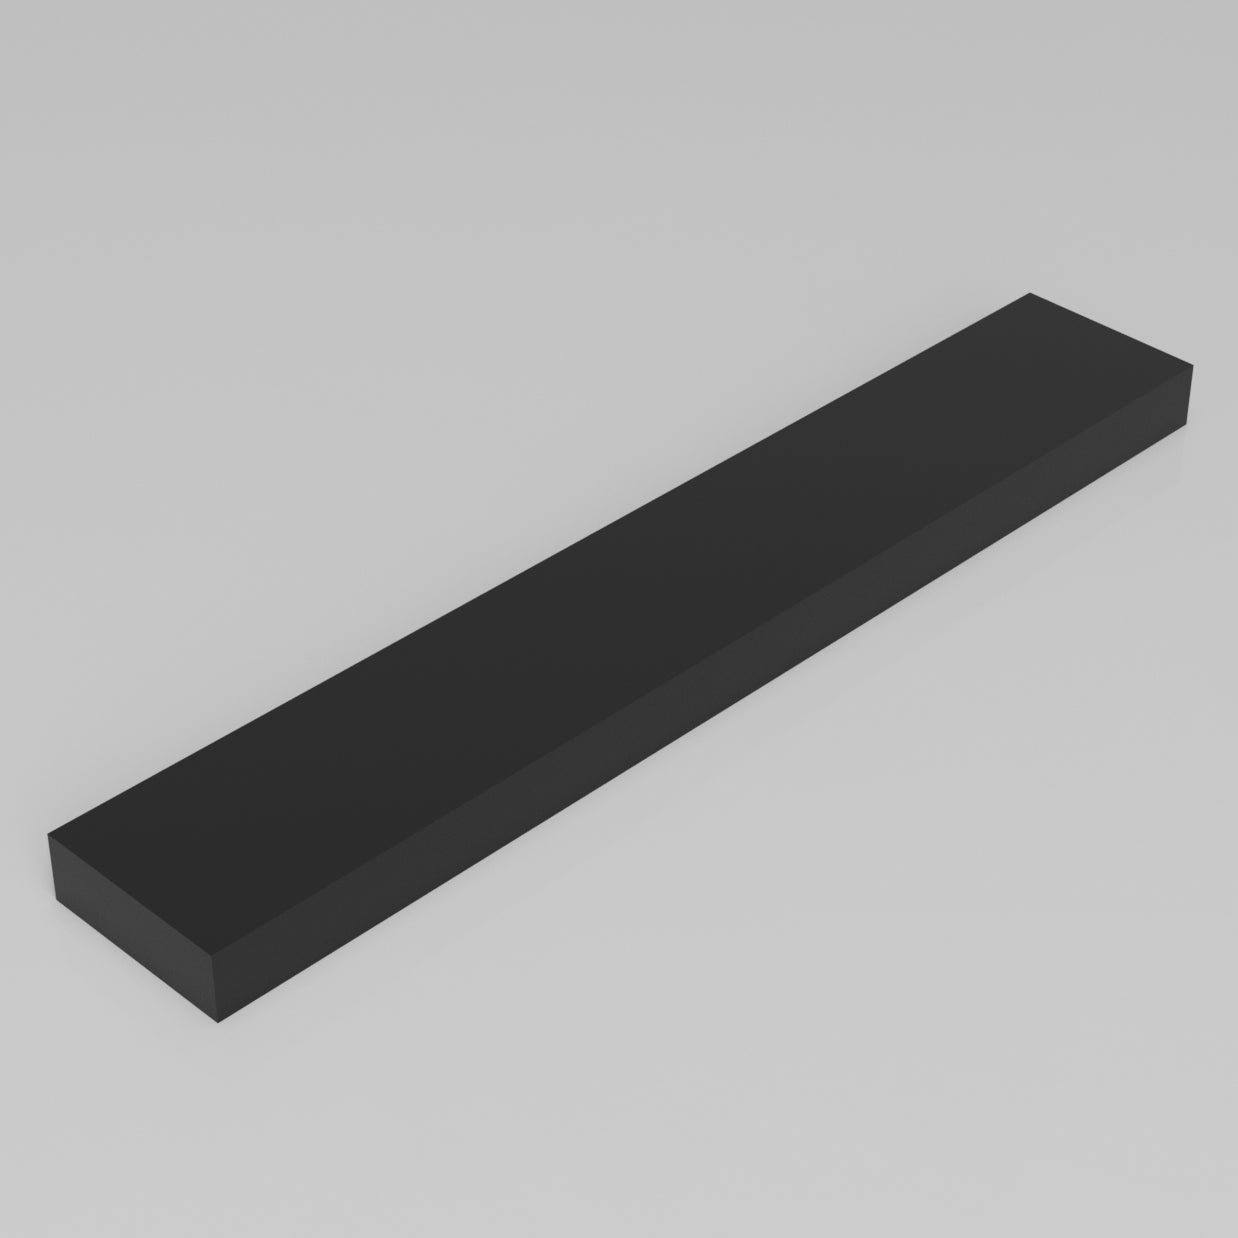 Machinable Wax Rectangular Block Front View 1 Inch by 3 Inch by 18 Inch